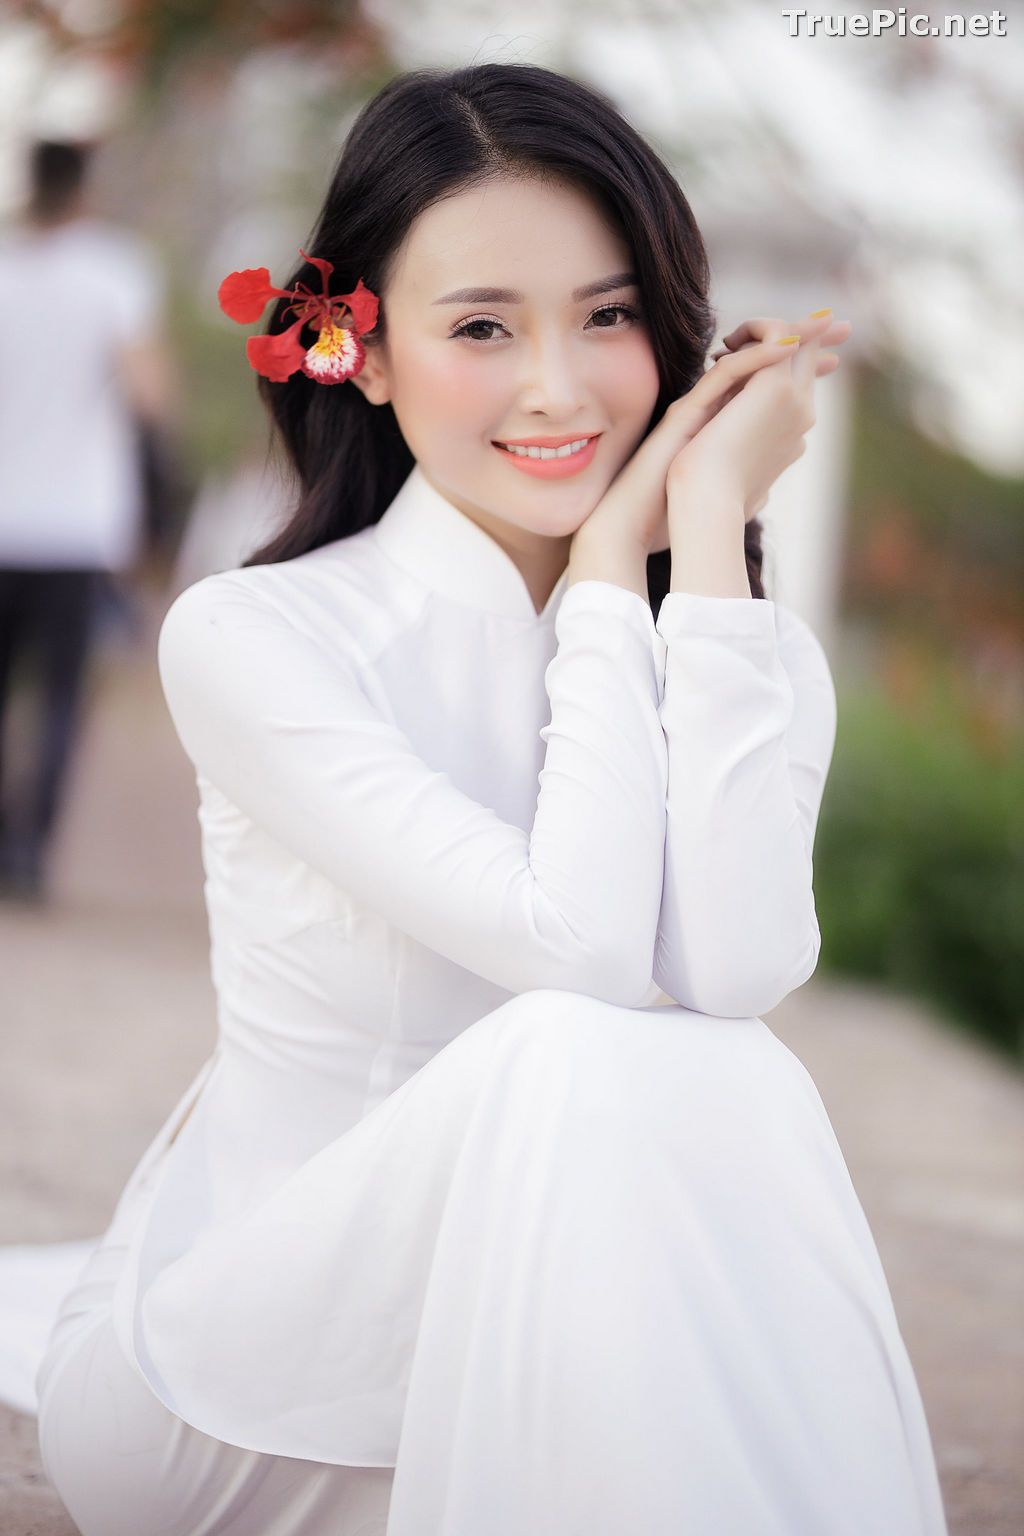 Image The Beauty of Vietnamese Girls with Traditional Dress (Ao Dai) #3 - TruePic.net - Picture-32